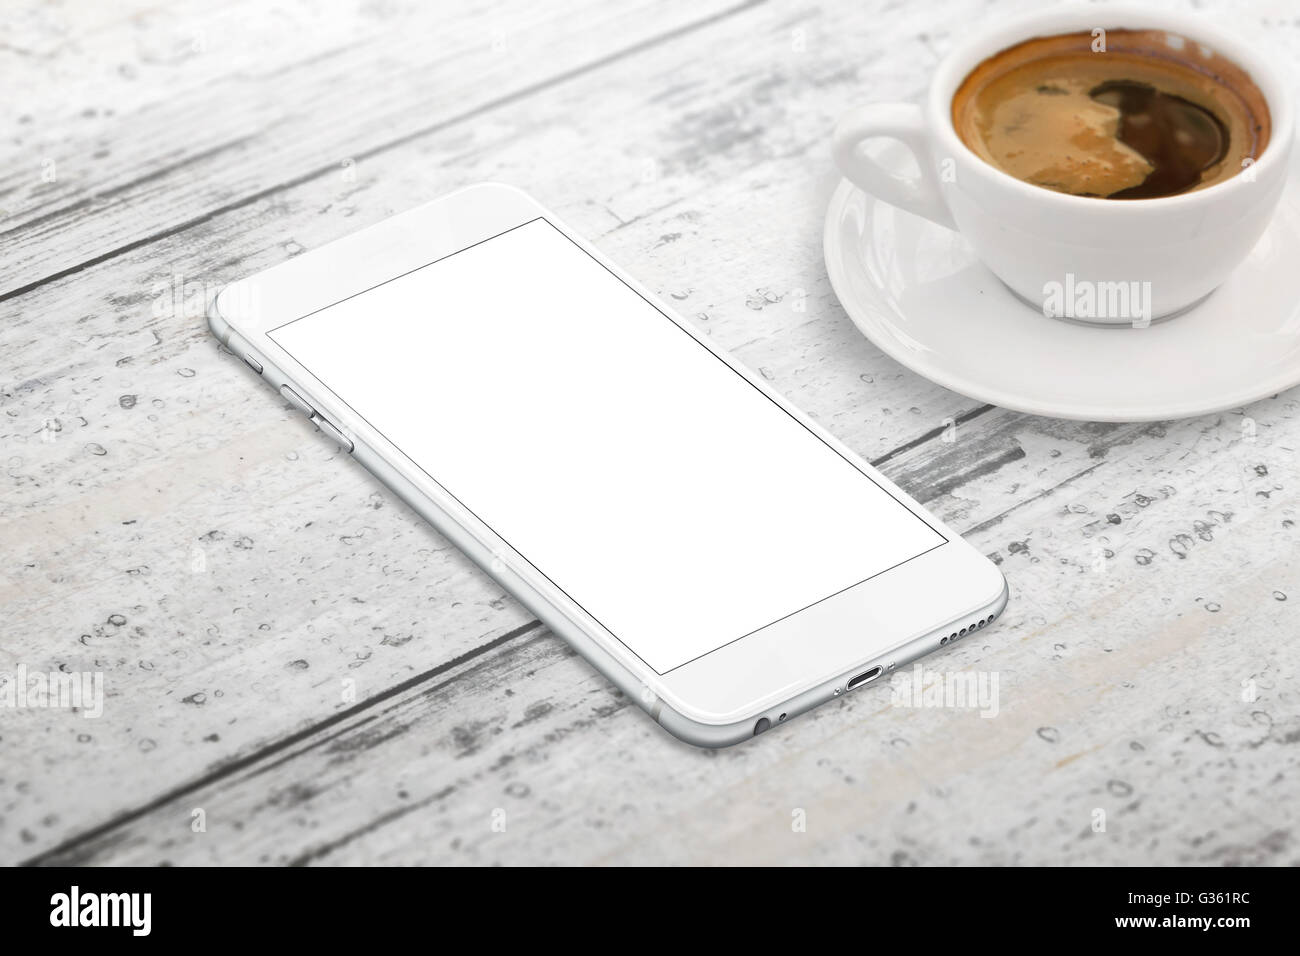 Smart phone with blank screen for mockup. Cup of coffee beside on table. Isometric view. Stock Photo